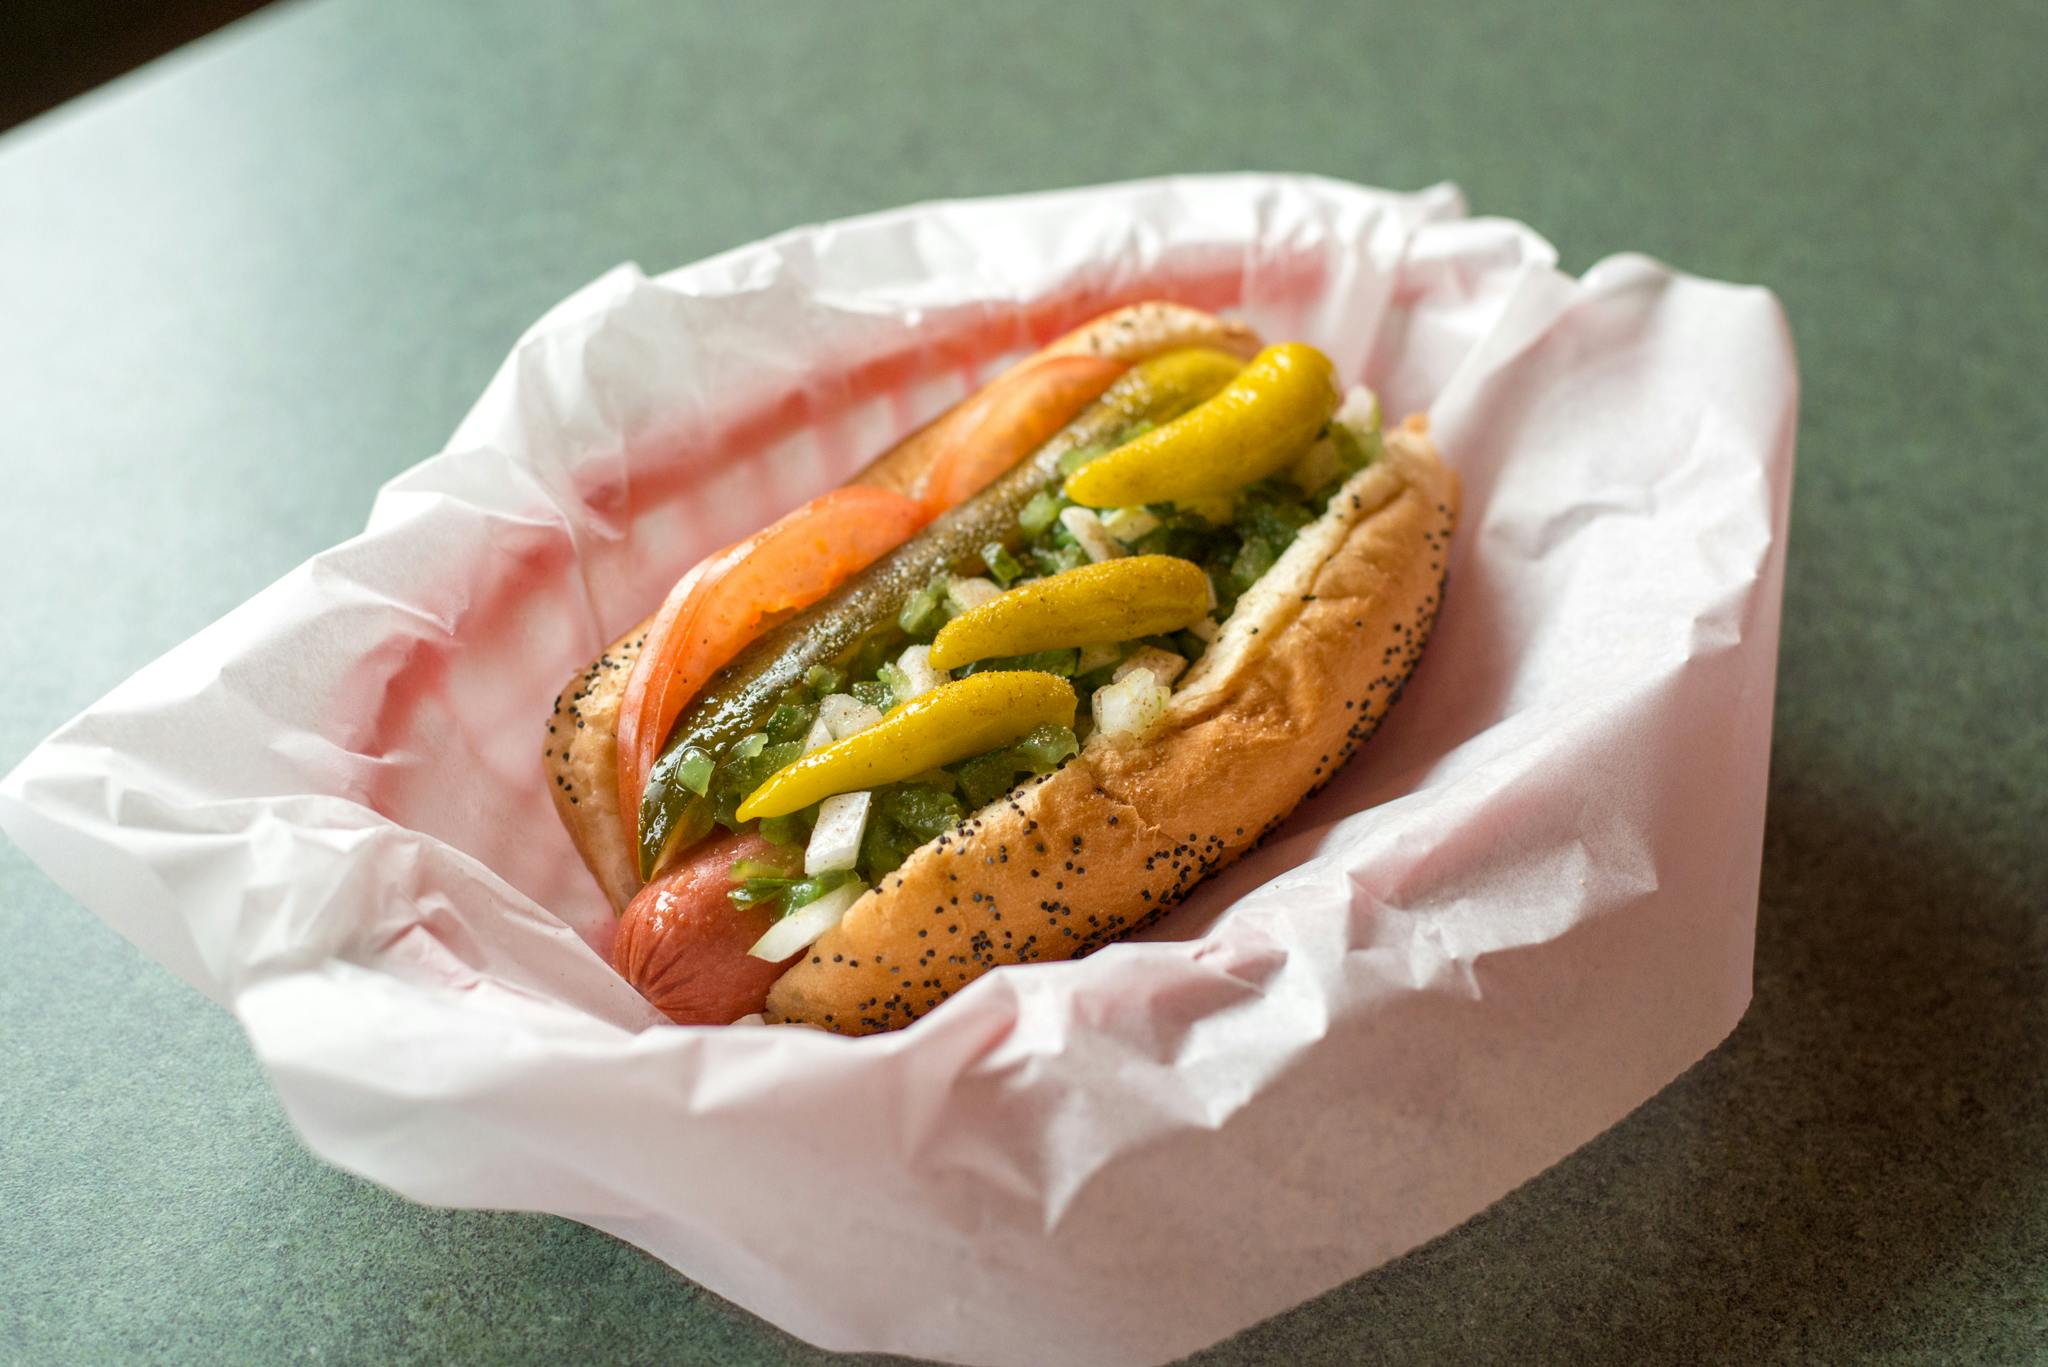 Chicago Dog from Kentro Gyros in Green Bay, WI